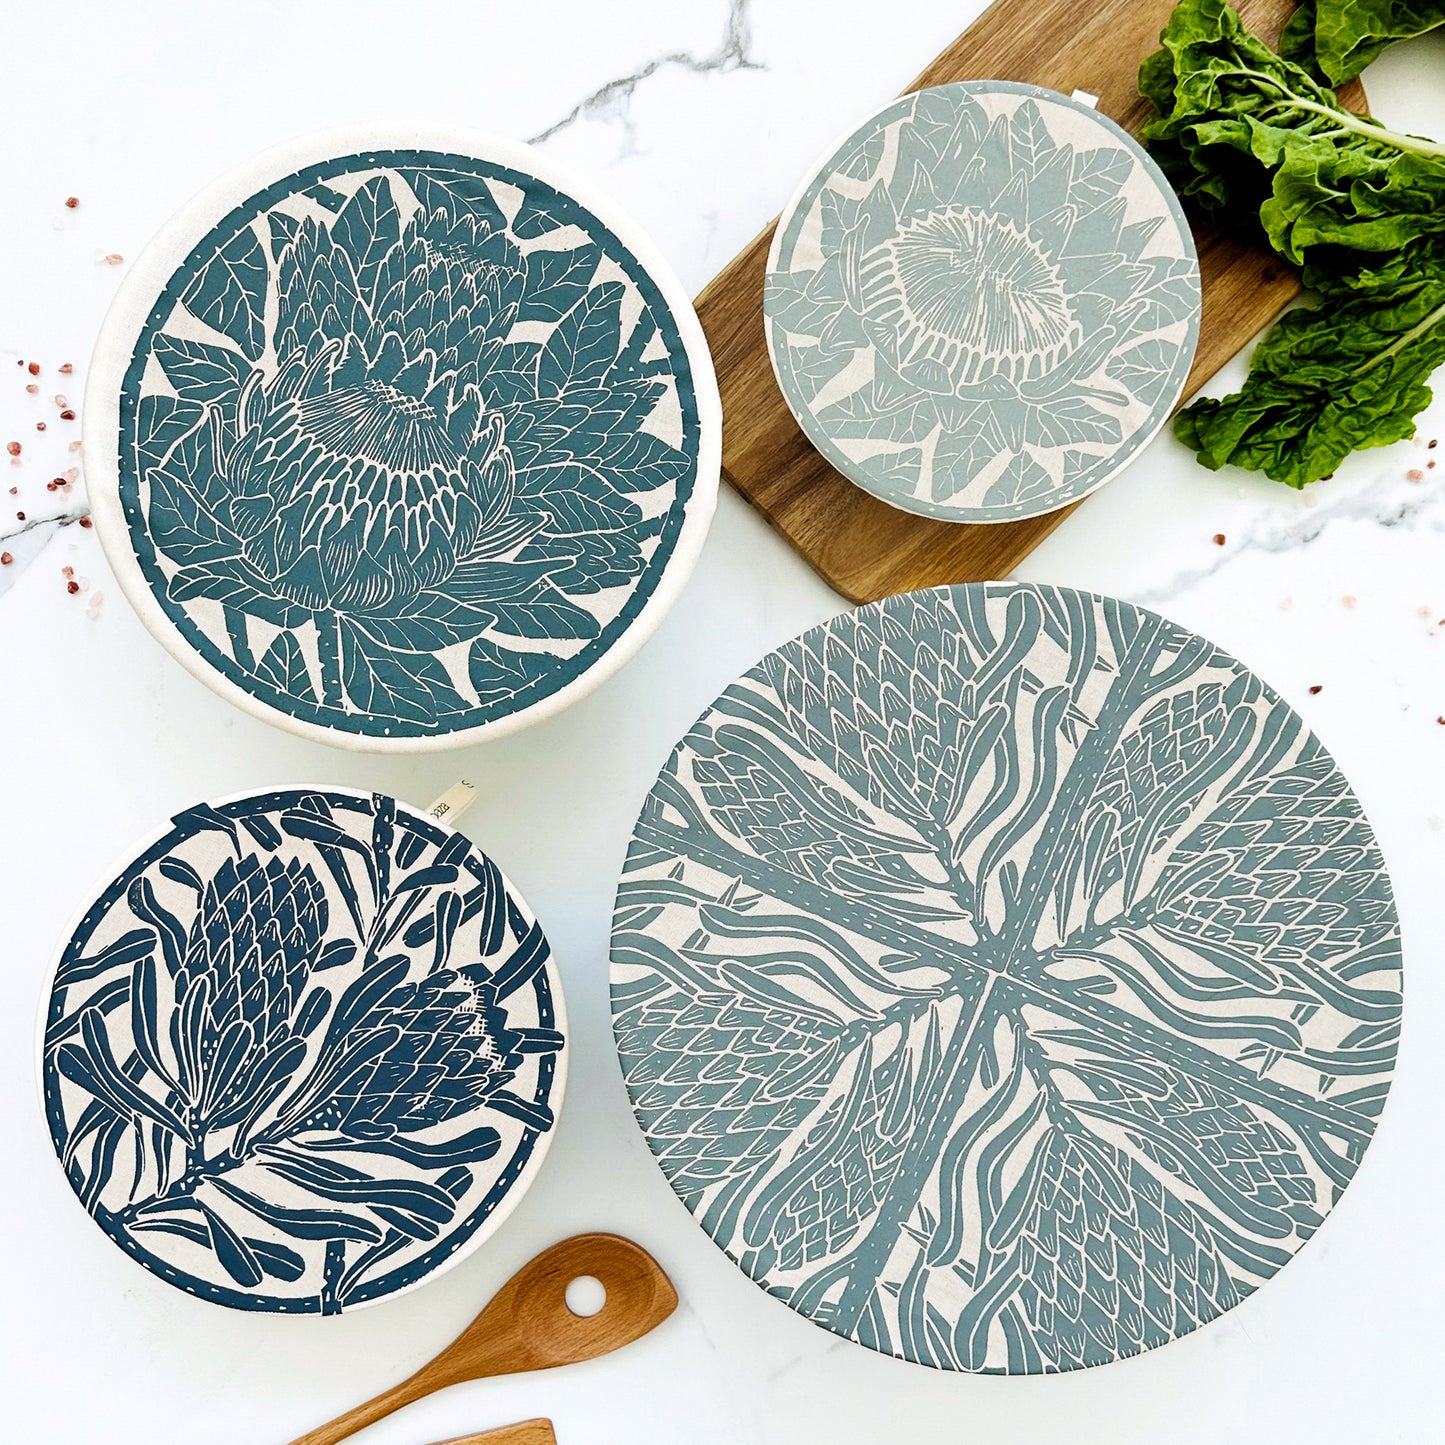 Dish and Bowl Cover Set of 4 Protea Print | covers everything